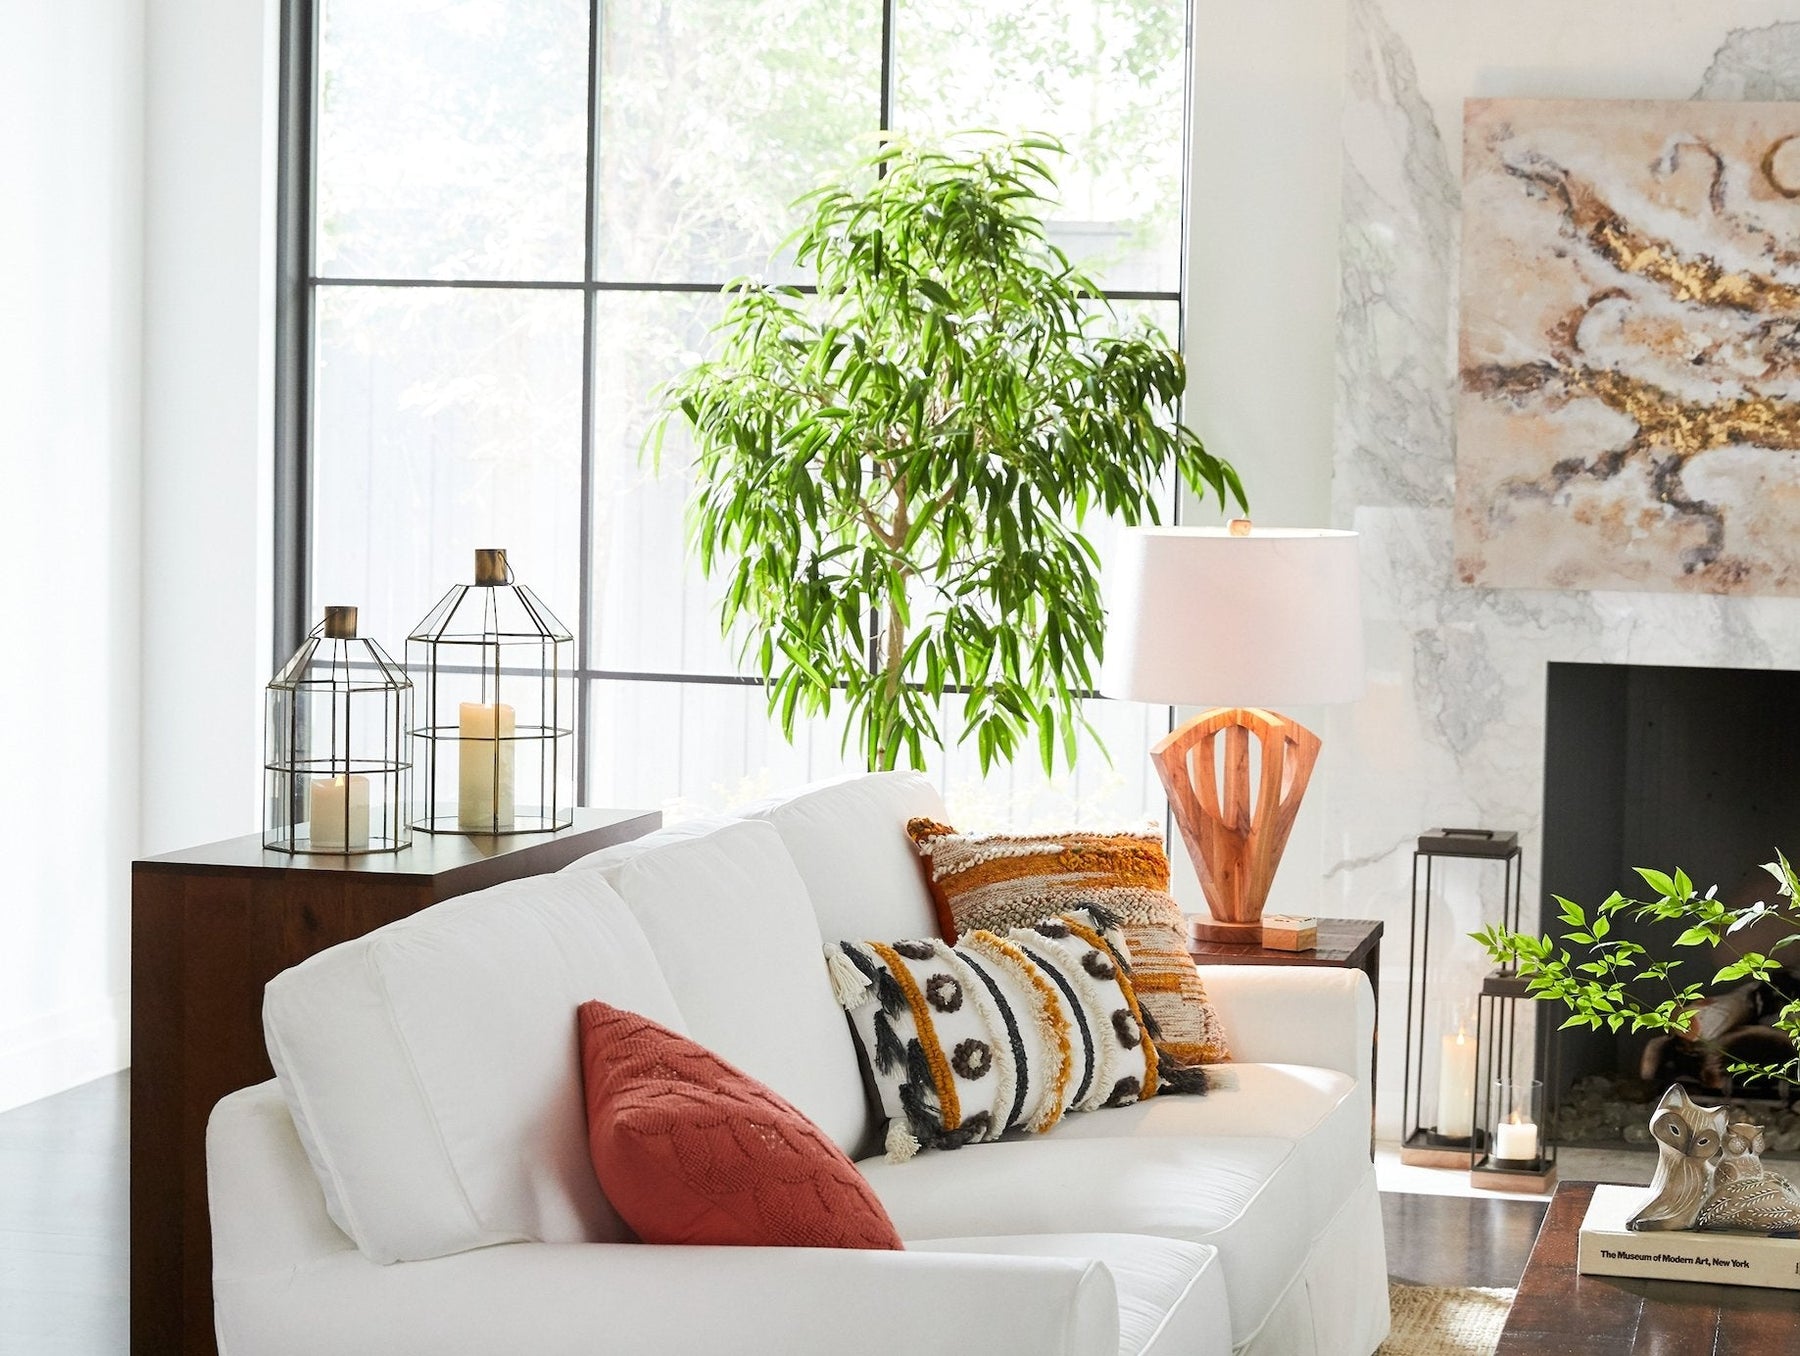 11 Ways to Add Natural Elements to Your Home Decor - Pier 1